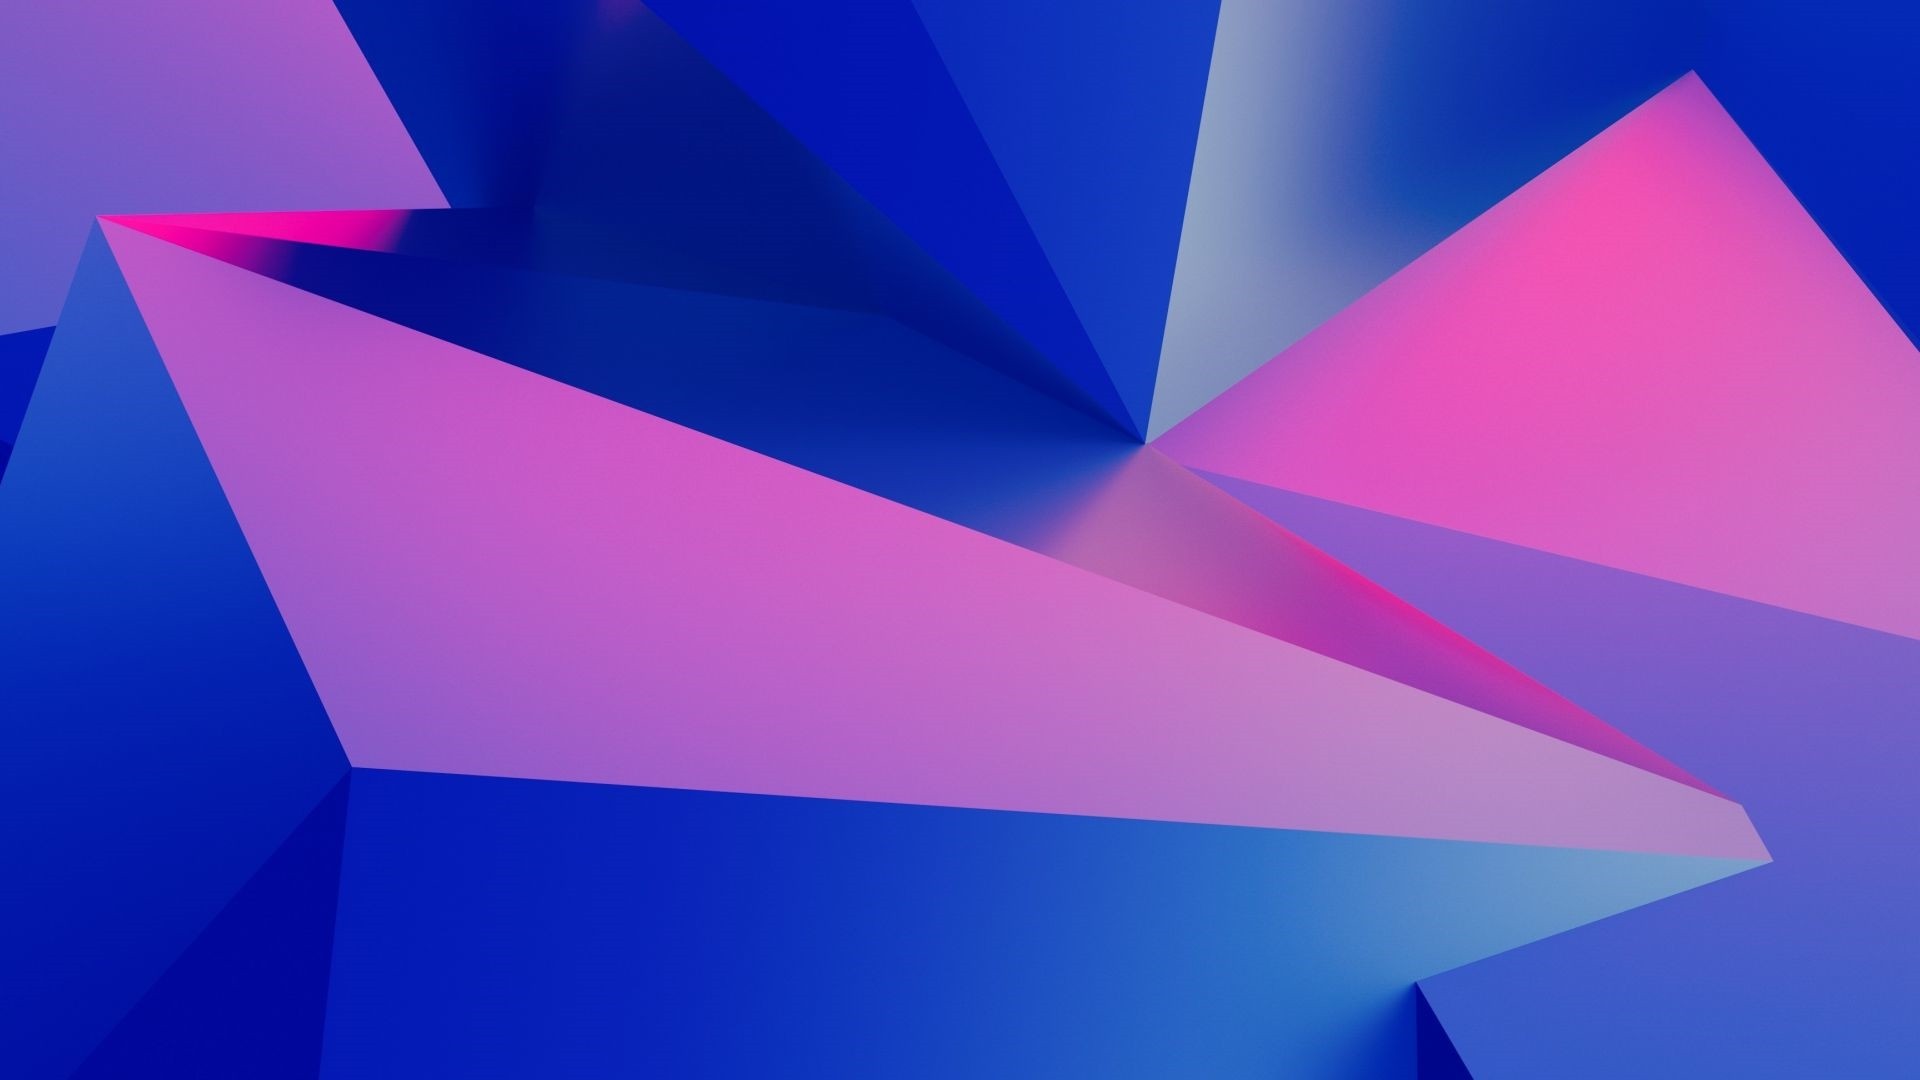 pink and blue wallpapers 26 images abstract category pink and blue wallpapers 26 images